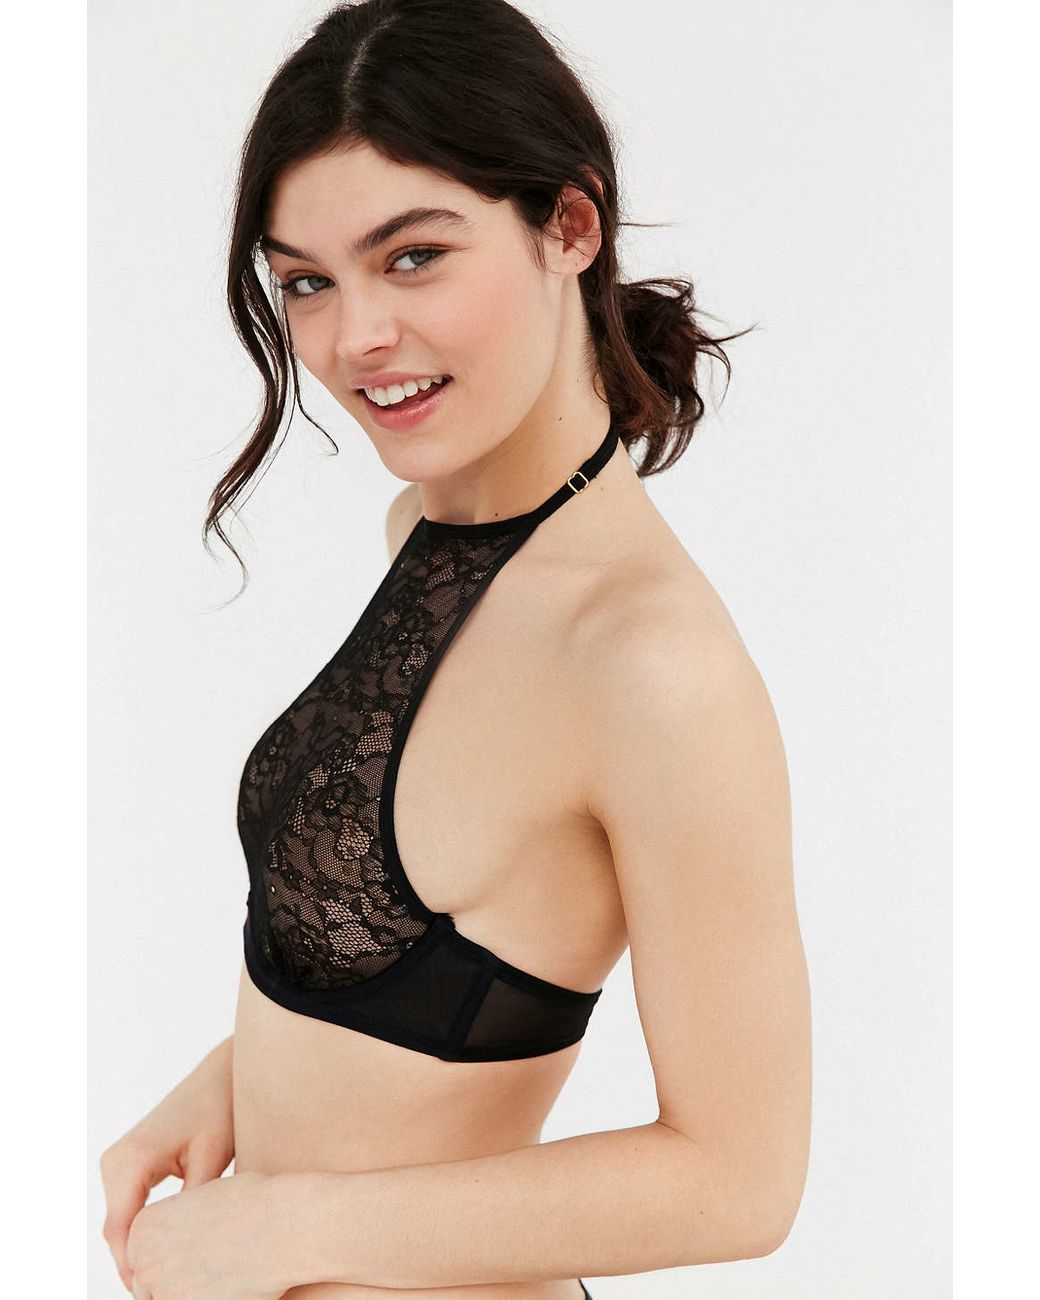 Out From Under Edie Lace High Neck Bra